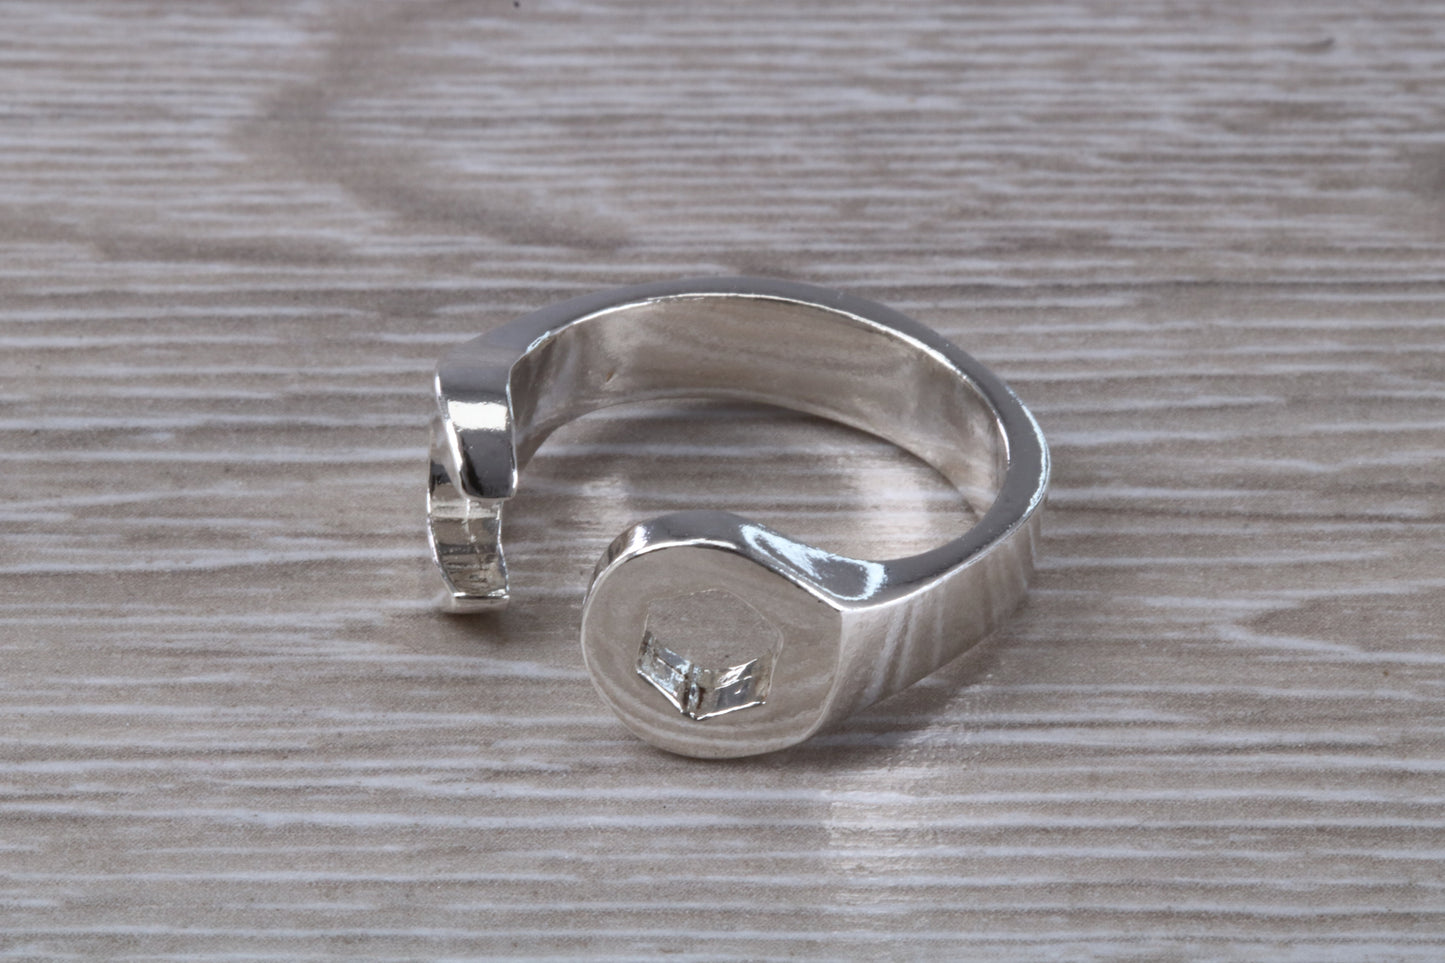 Chunky Spanner ring, solid silver, suitable for ladies or gents. Available in silver, yellow gold, white gold and platinum